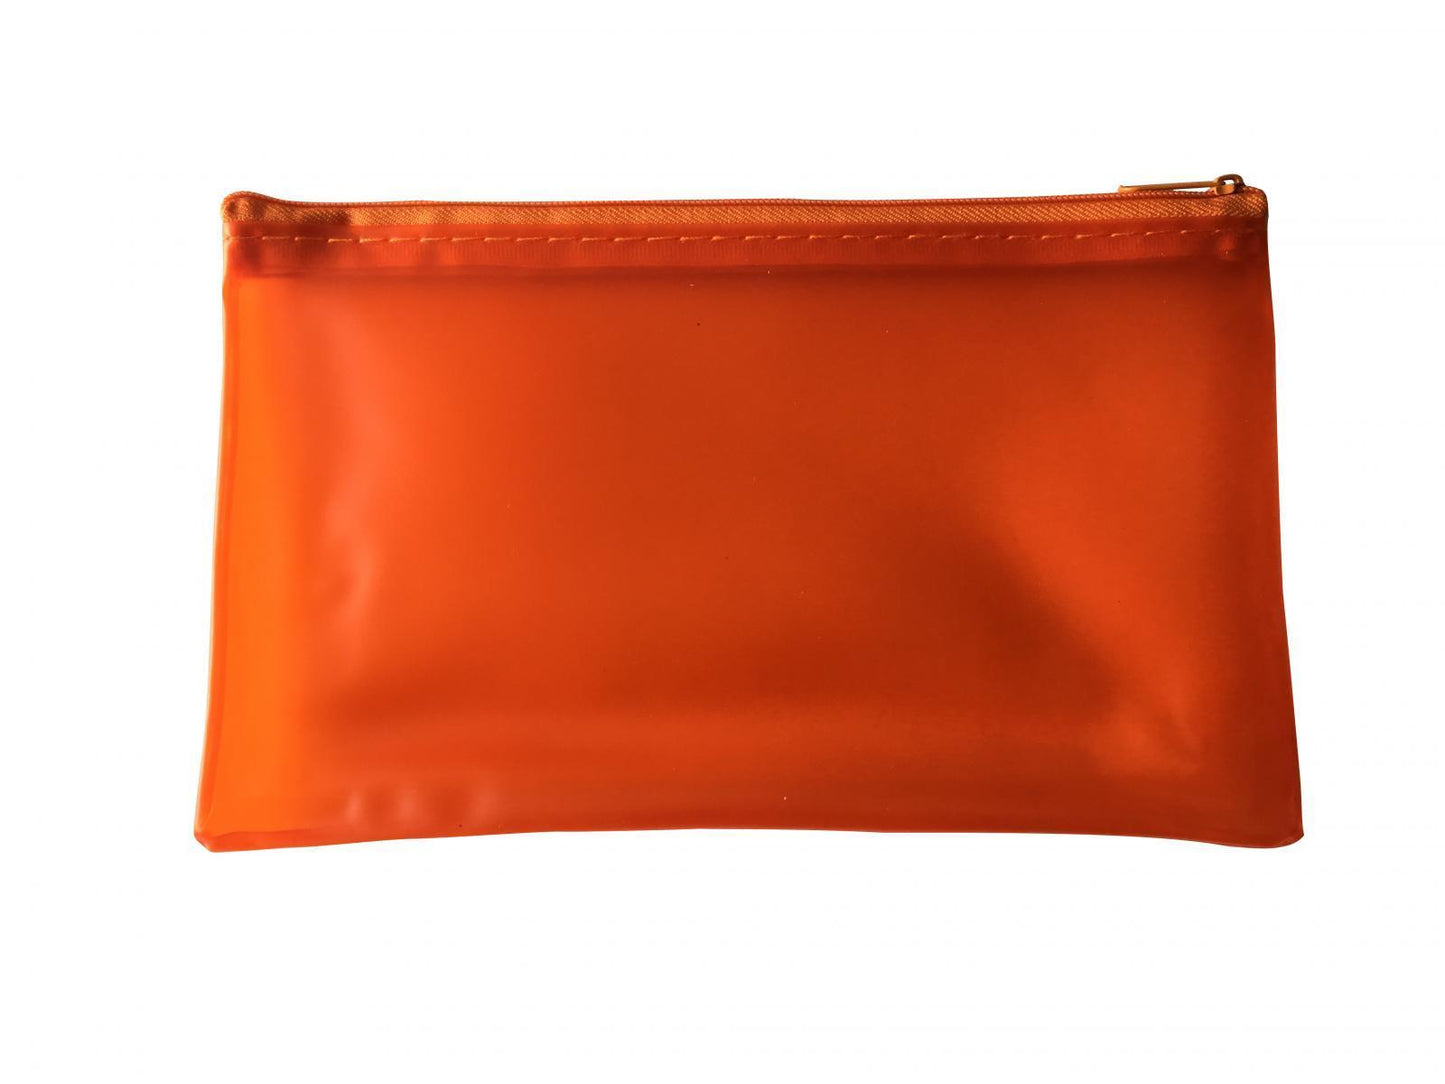 8x5" Frosted Orange Pencil Case - See Through Exam Clear Translucent